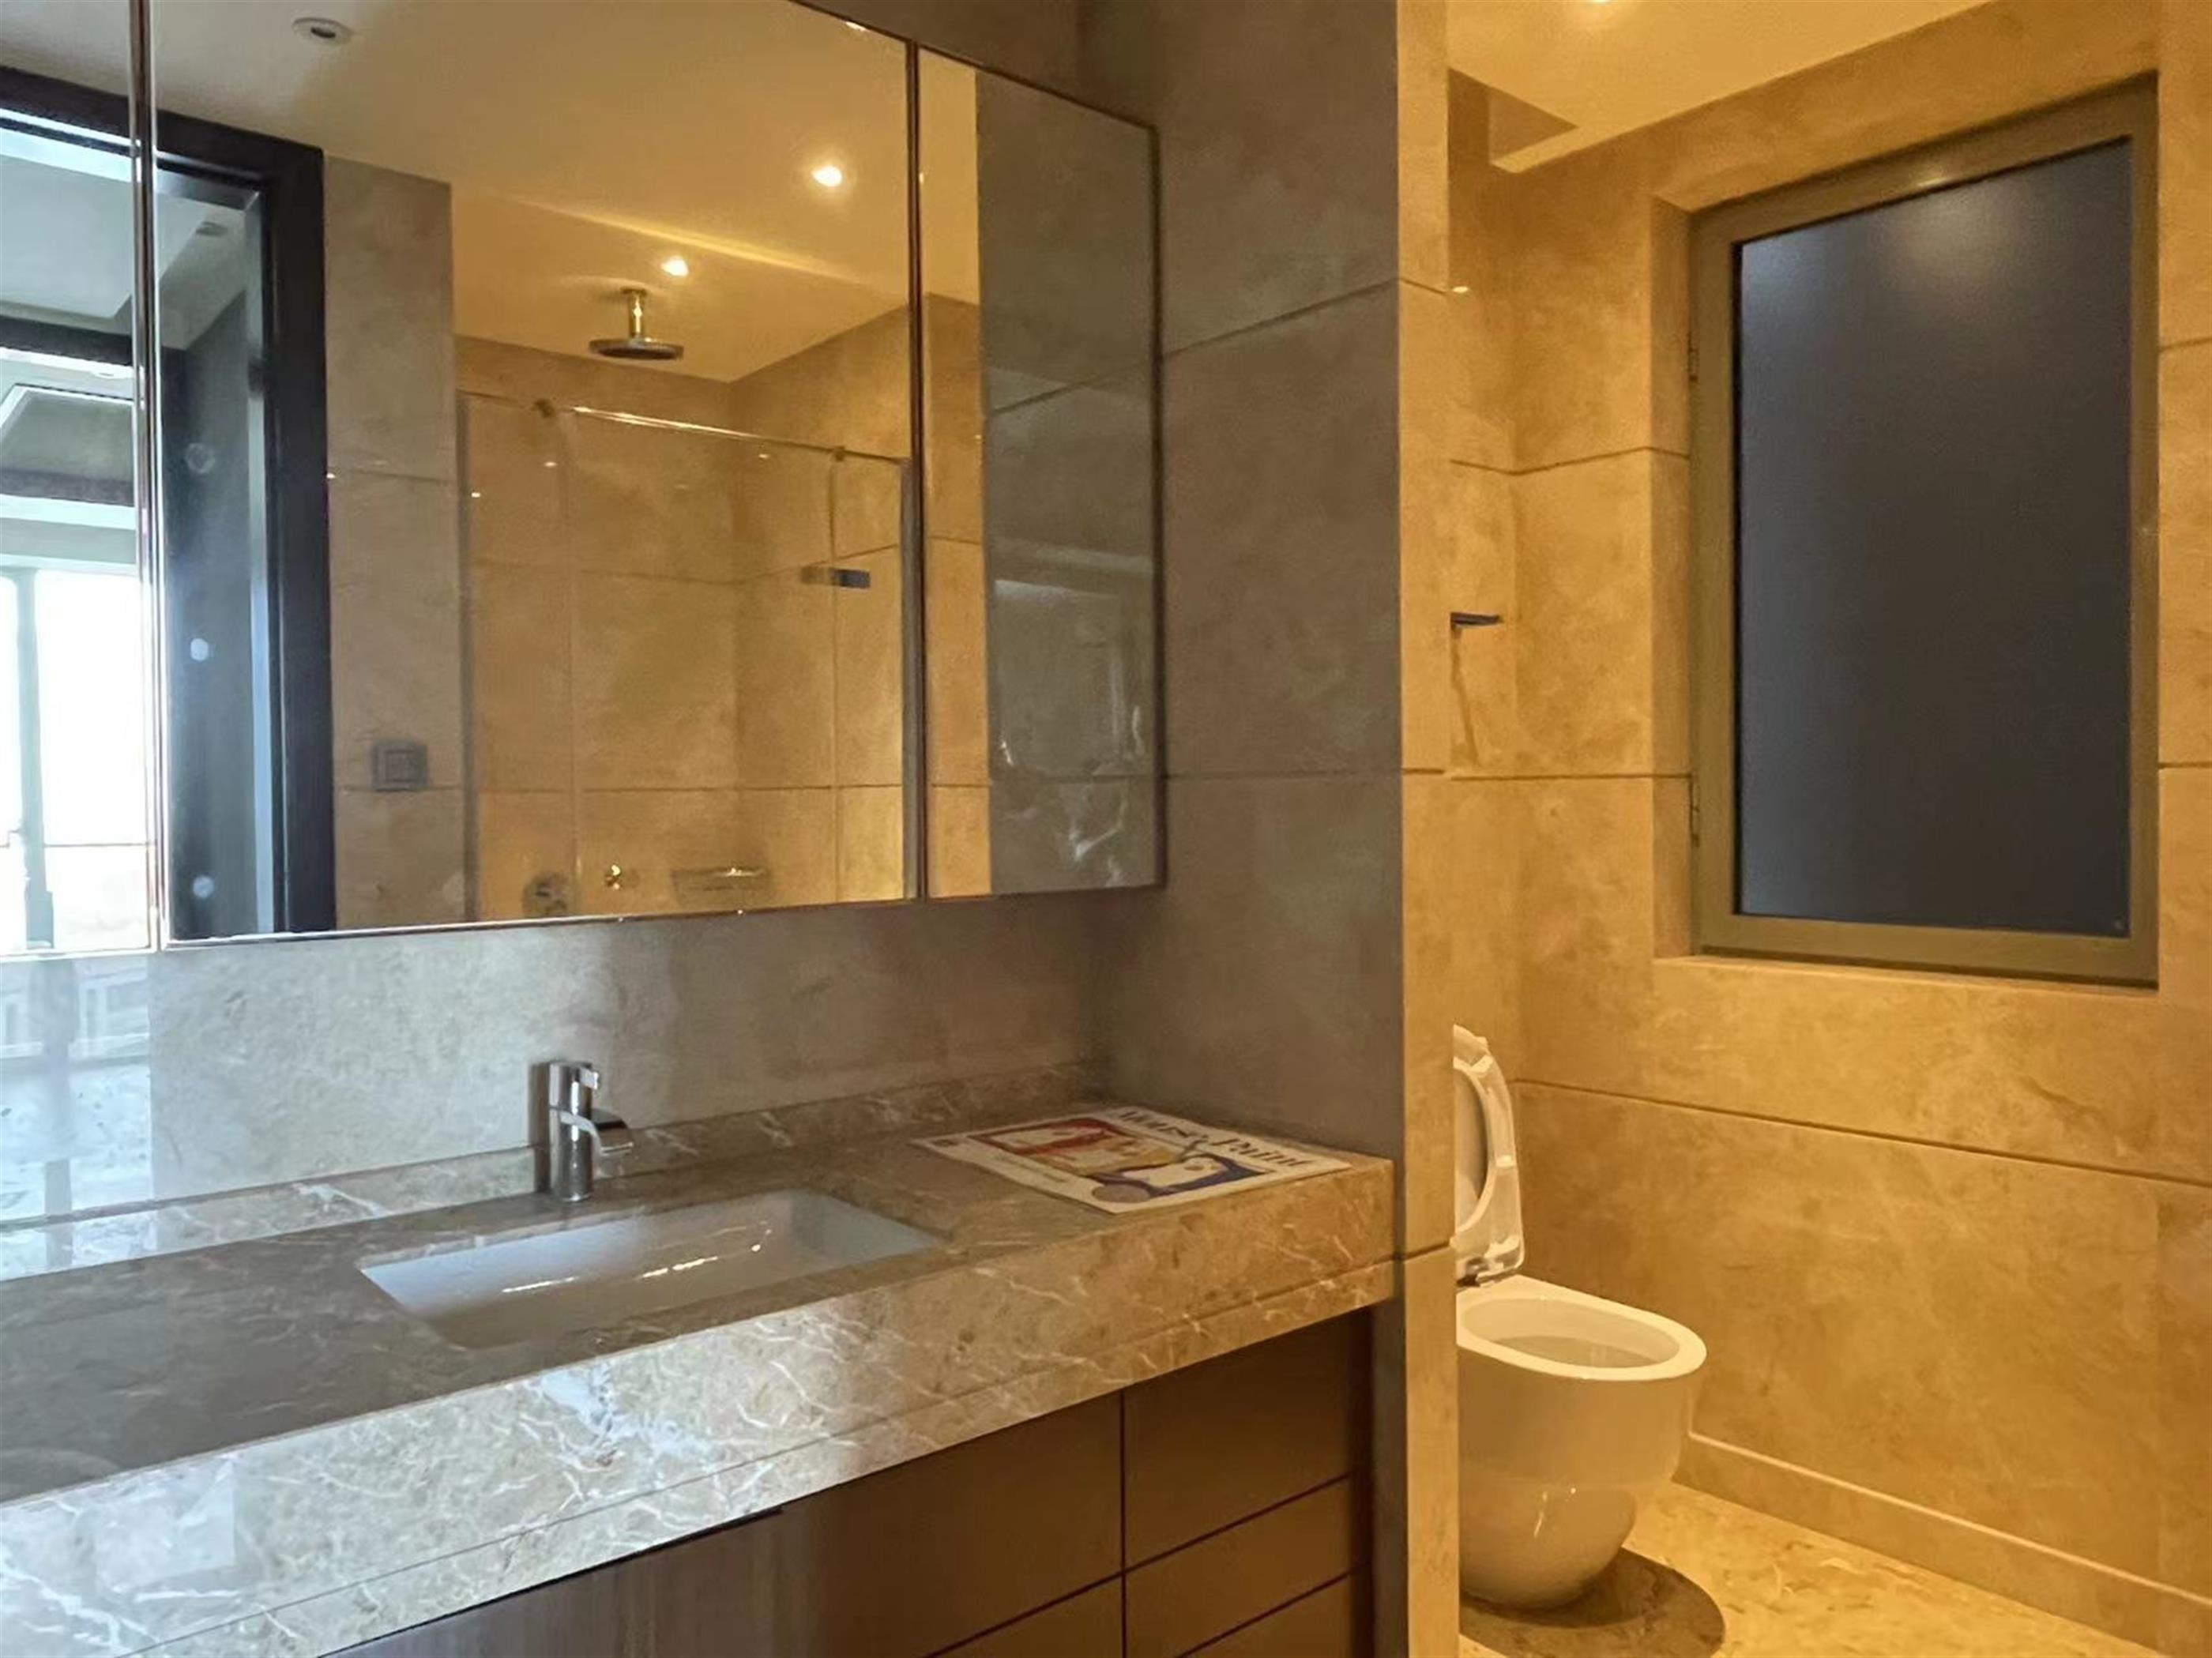 bathroom Deluxe Spacious Classic 3BR Apartment for Rent in Shanghai’s Xintiandi Neighborhood